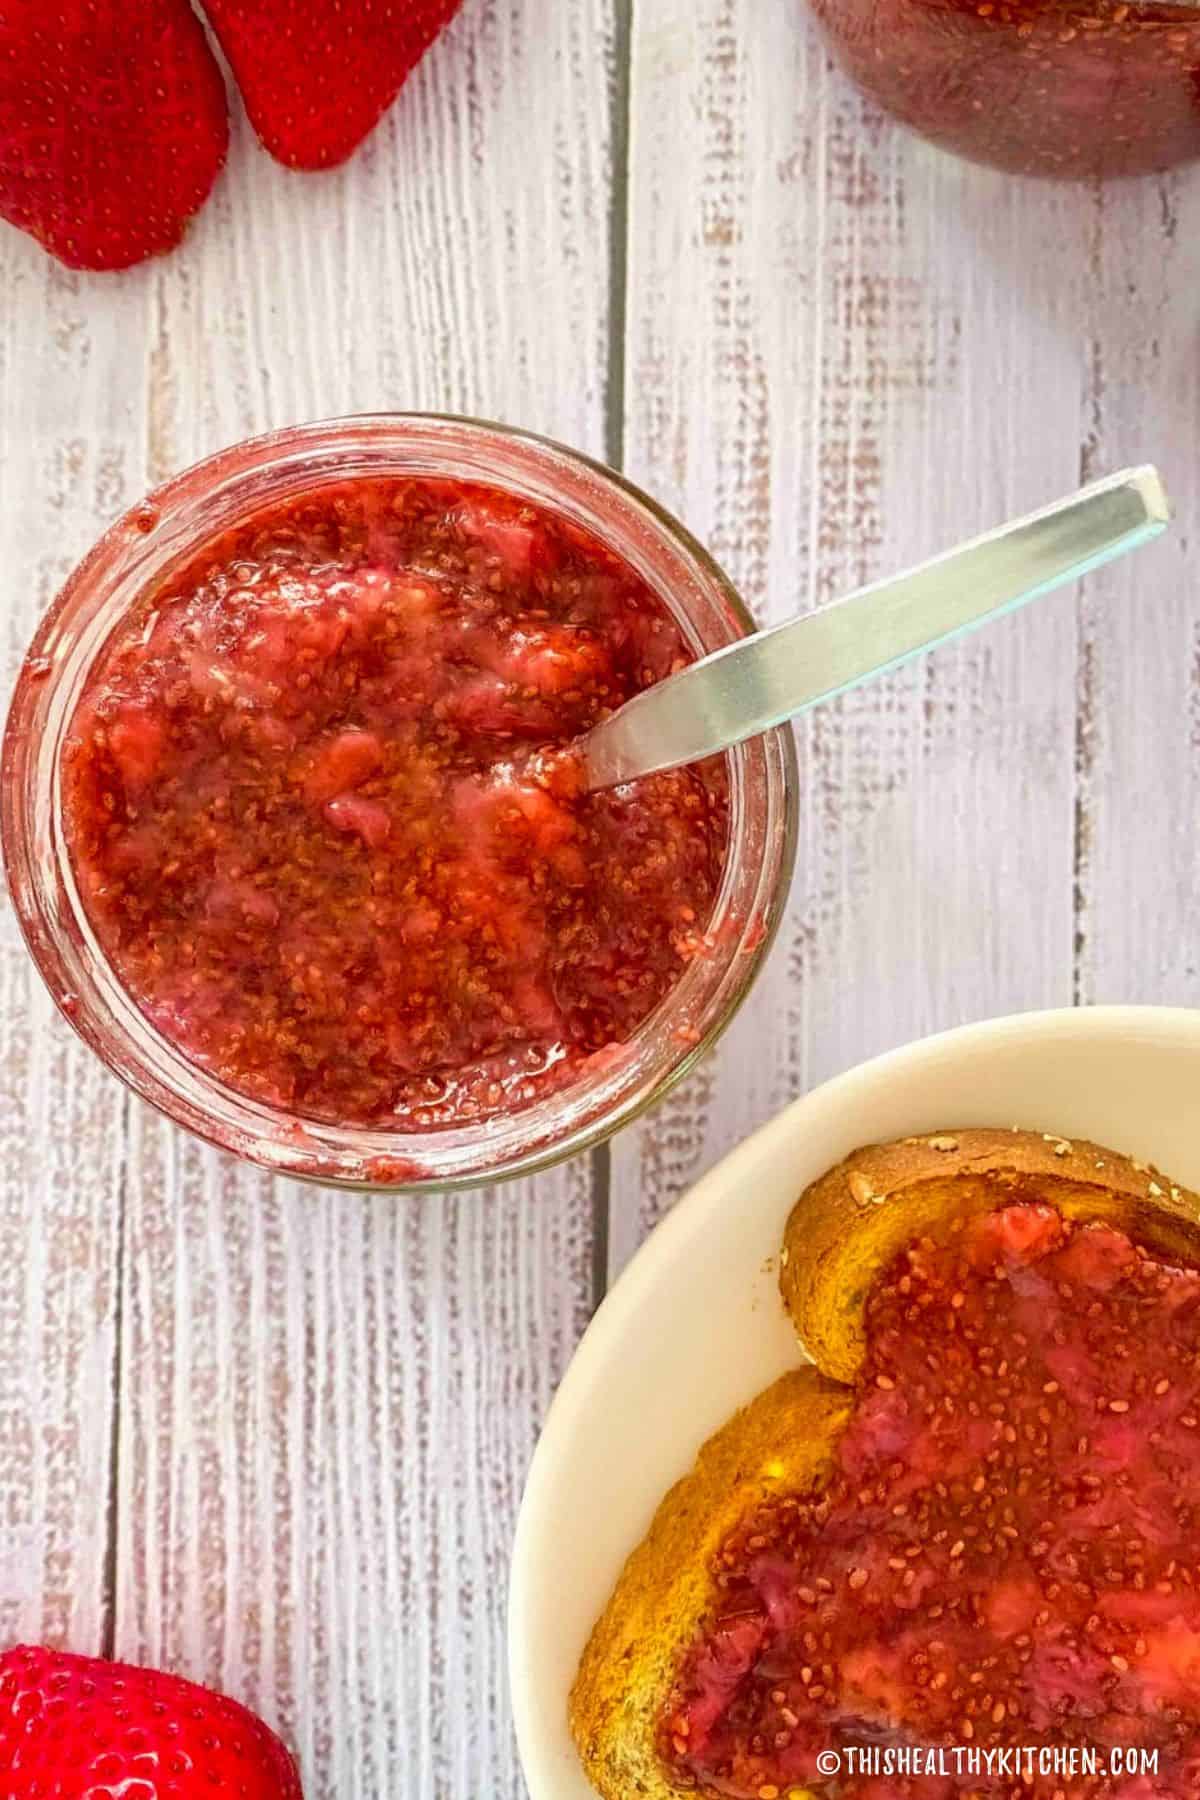 Jar of strawberry jam and toast with jam on top below it.